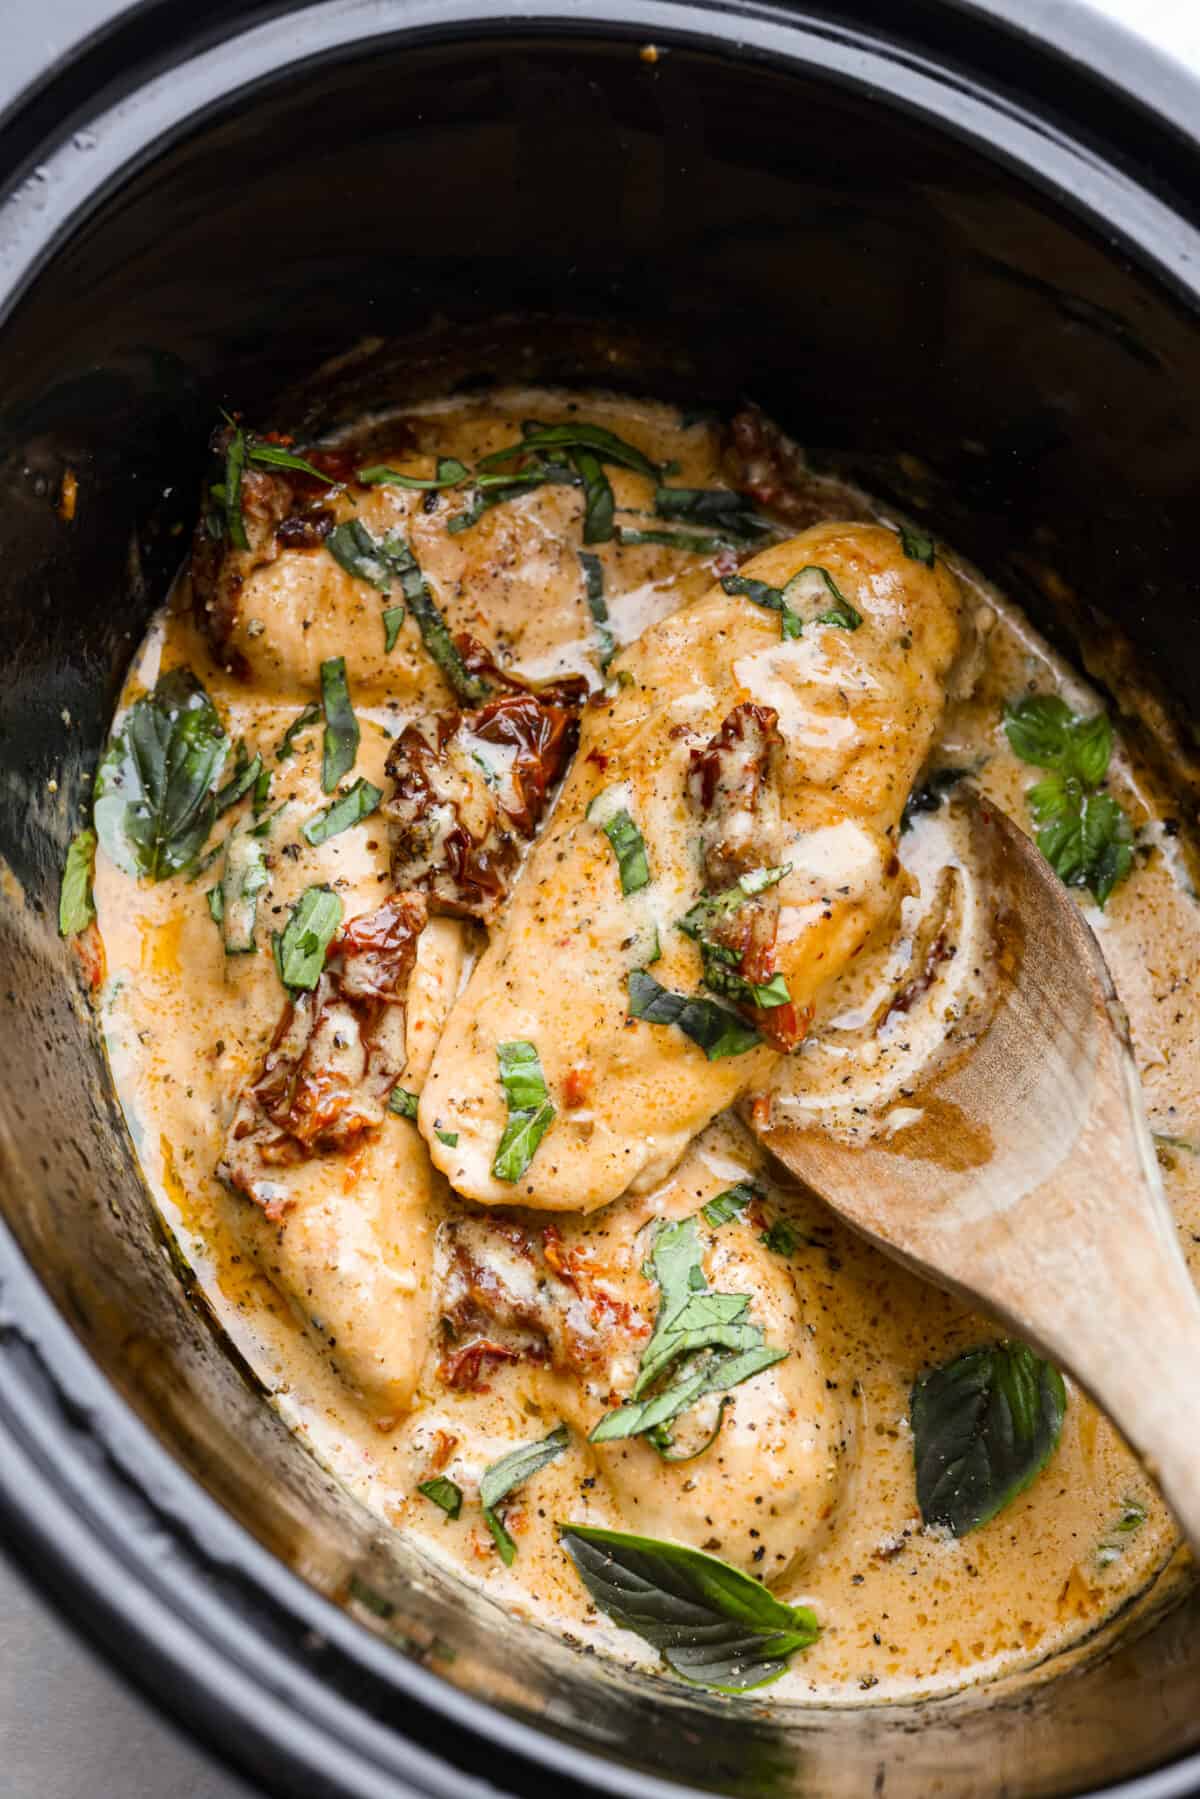 Cooked Tuscan chicken in a crock pot, garnished with fresh basil.